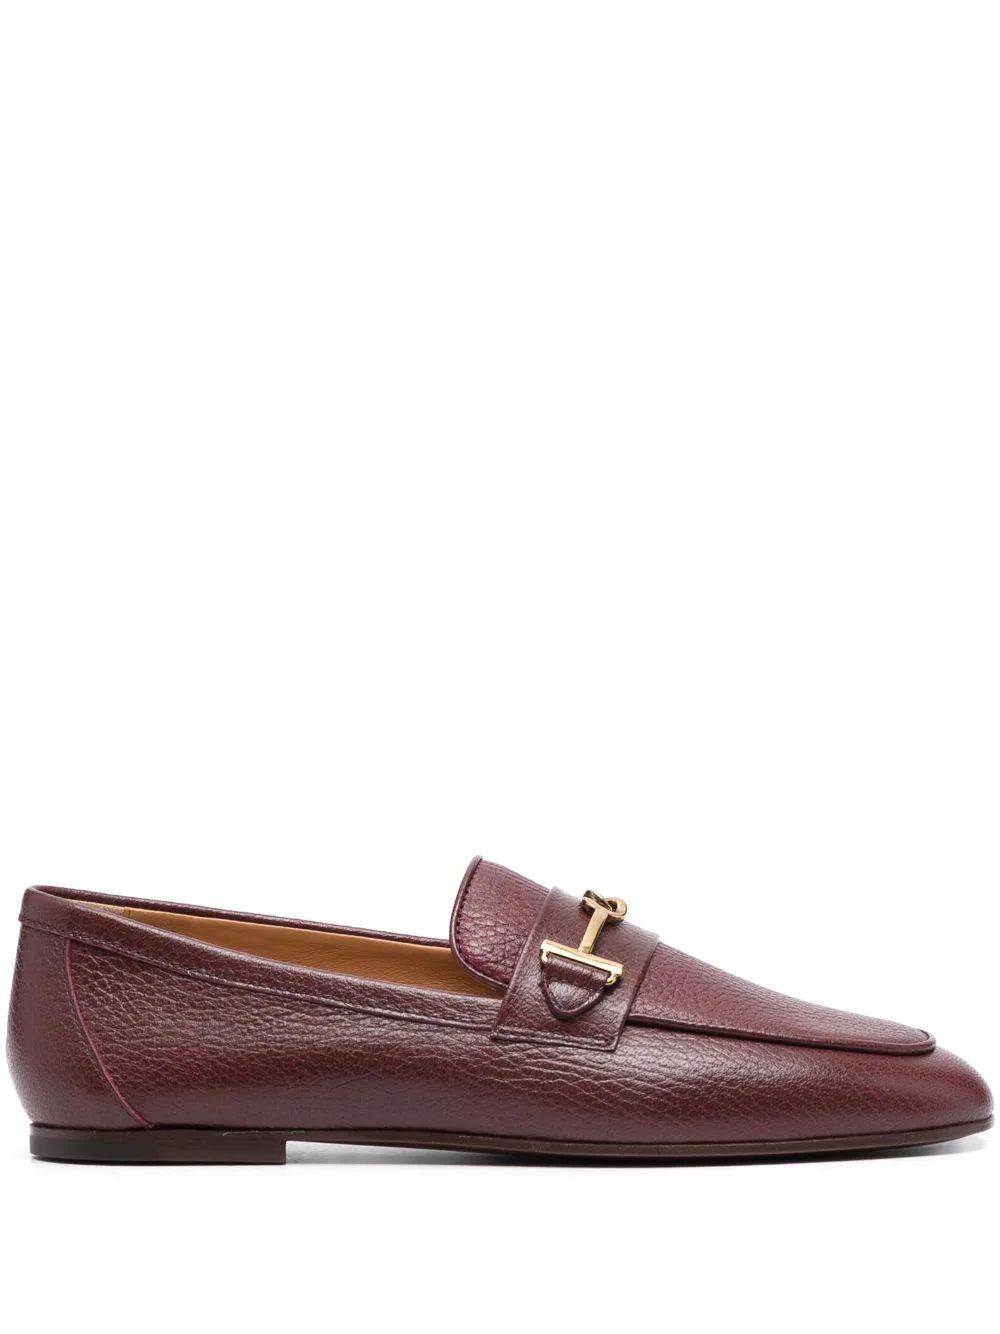 logo-detail leather loafers | Farfetch Global